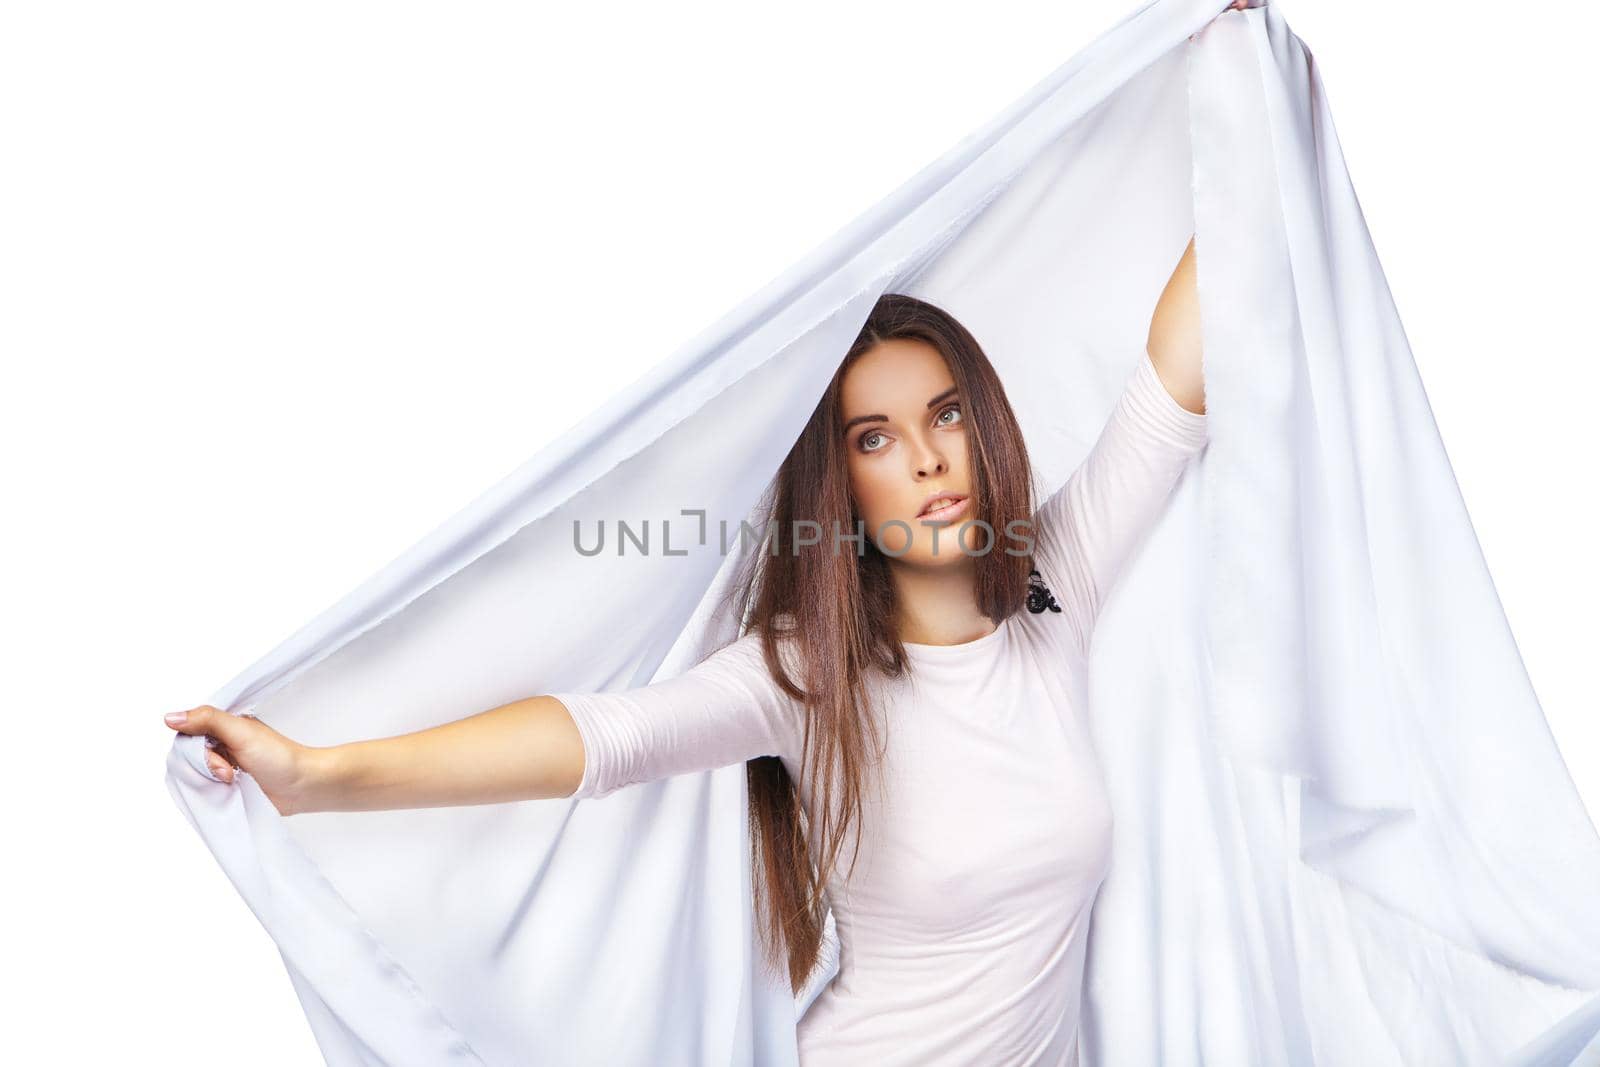 Sexy woman wearing white dress over white background